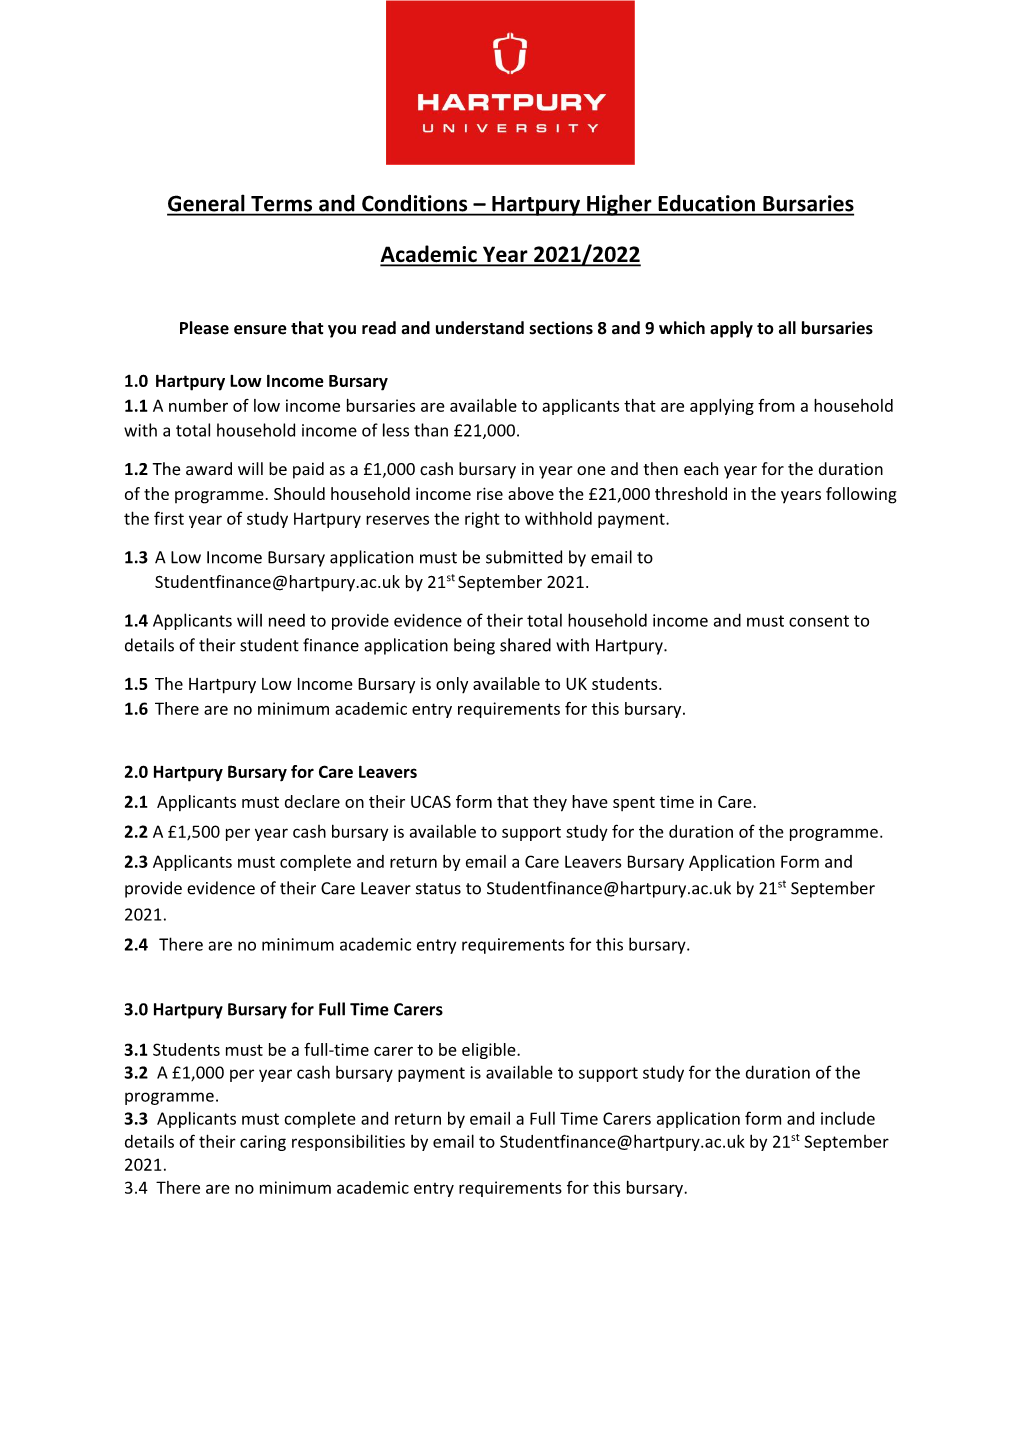 General Terms and Conditions – Hartpury Higher Education Bursaries Academic Year 2021/2022